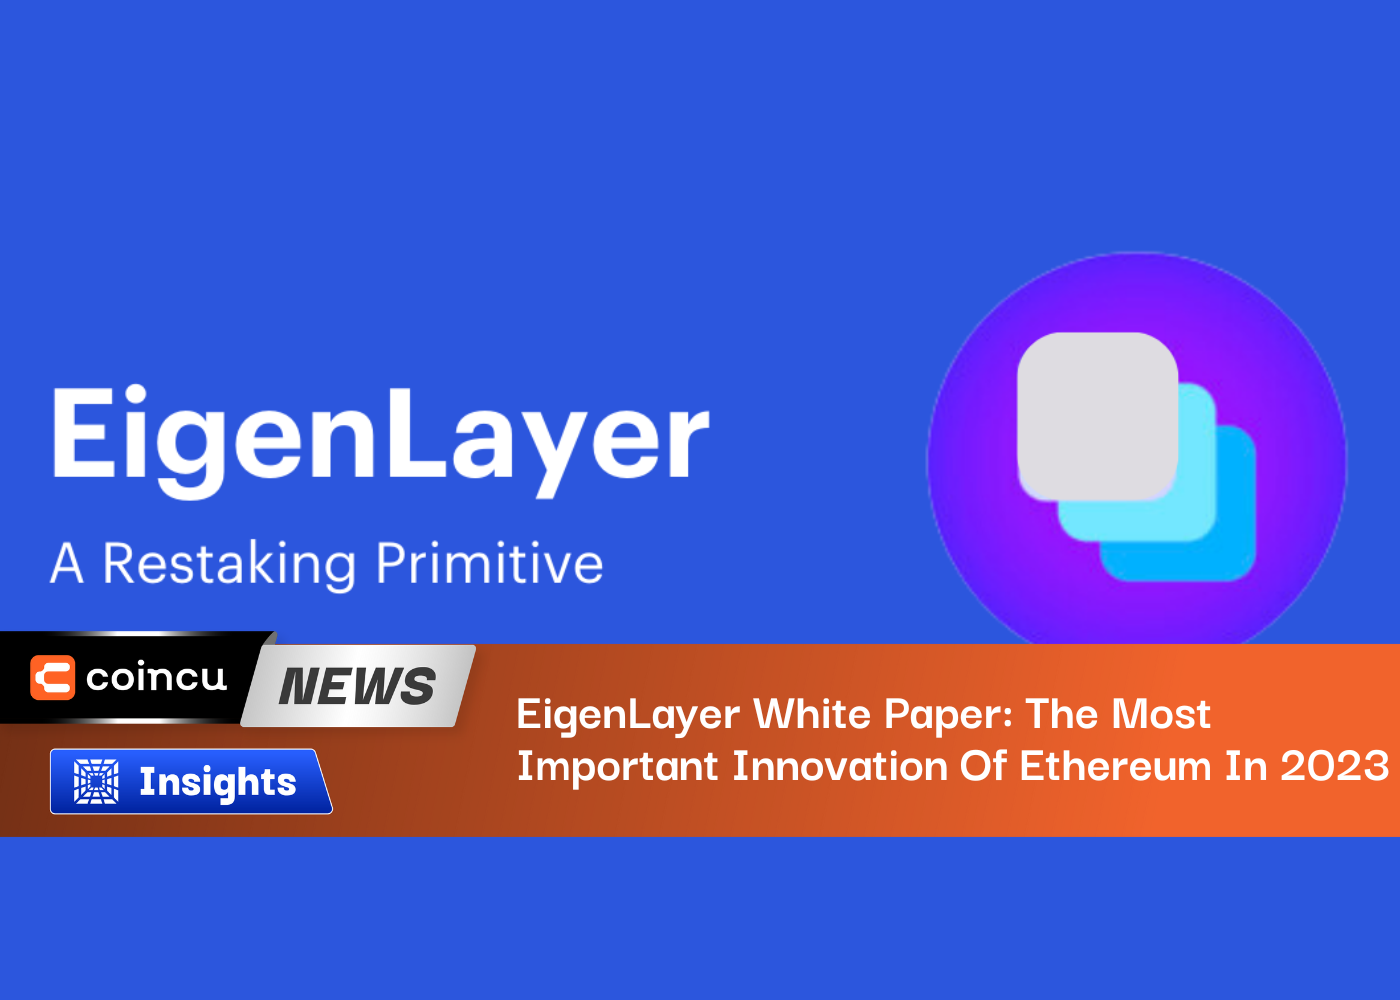 EigenLayer White Paper: The Most Important Innovation Of Ethereum In 2023